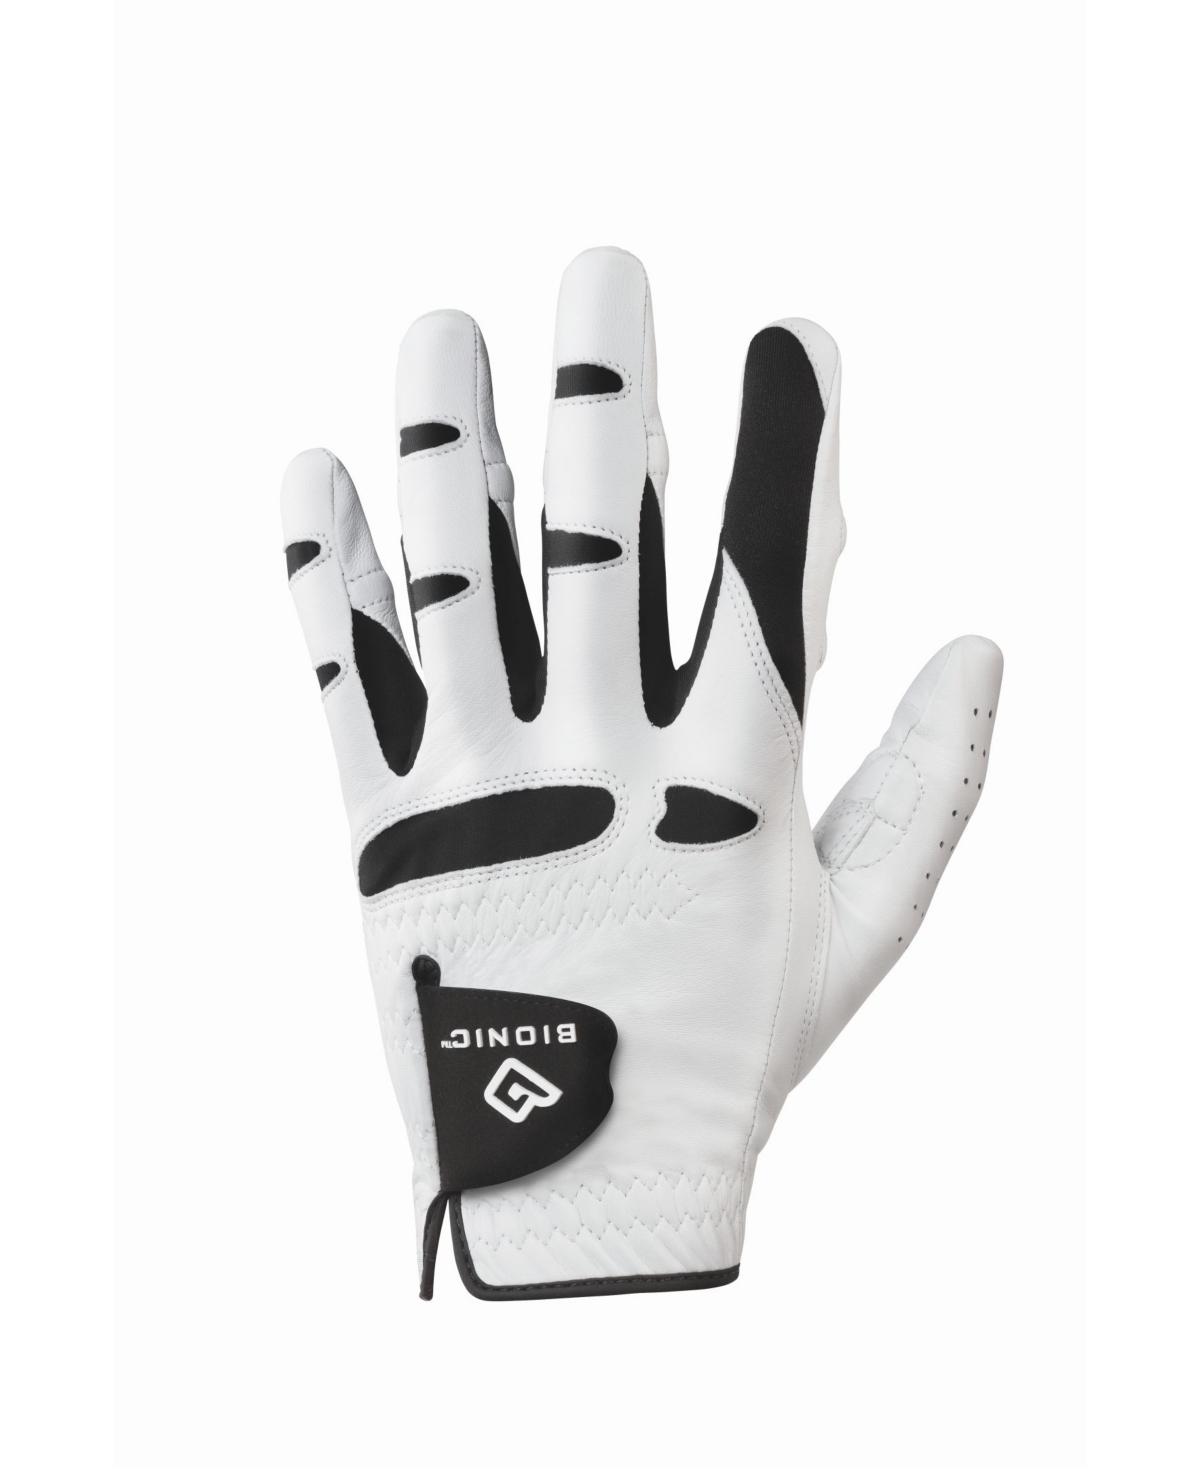 Save 42% on Men's Natural Fit Golf Glove - Right Hand